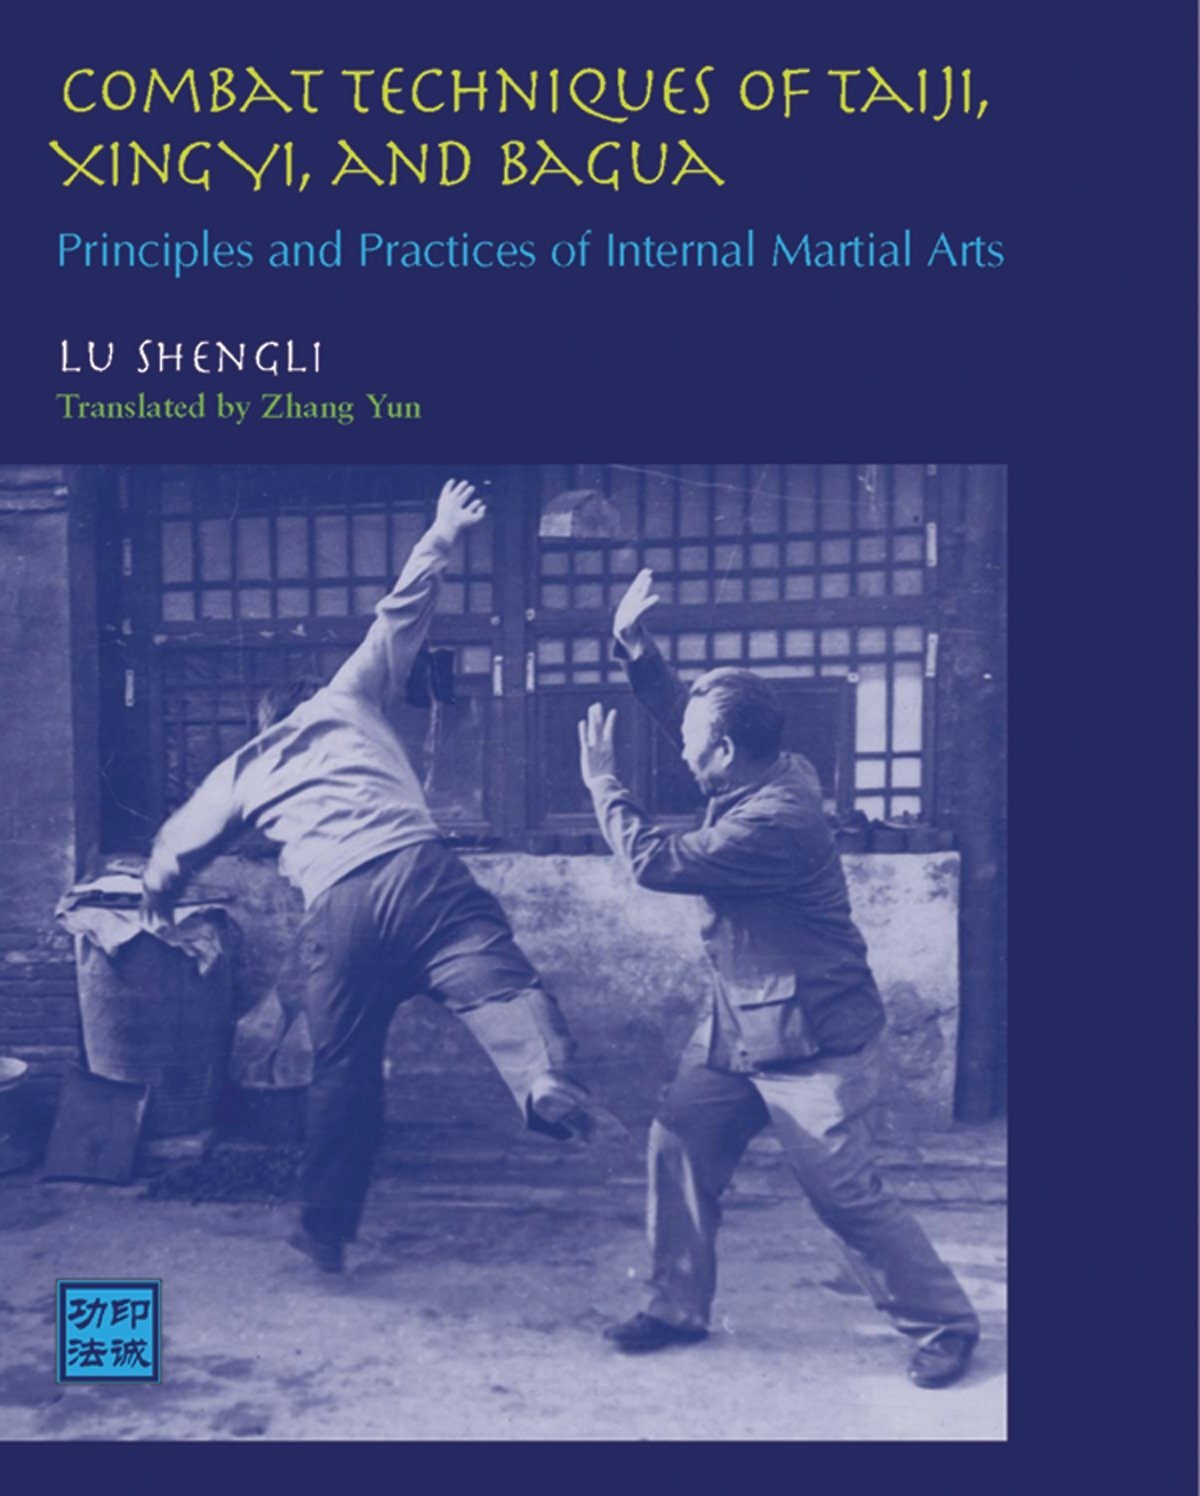 Combat Techniques of Taiji, Xingyi, and Bagua: Principles and Practices of Internal Martial Arts Book by Lu Shengli - Budovideos Inc